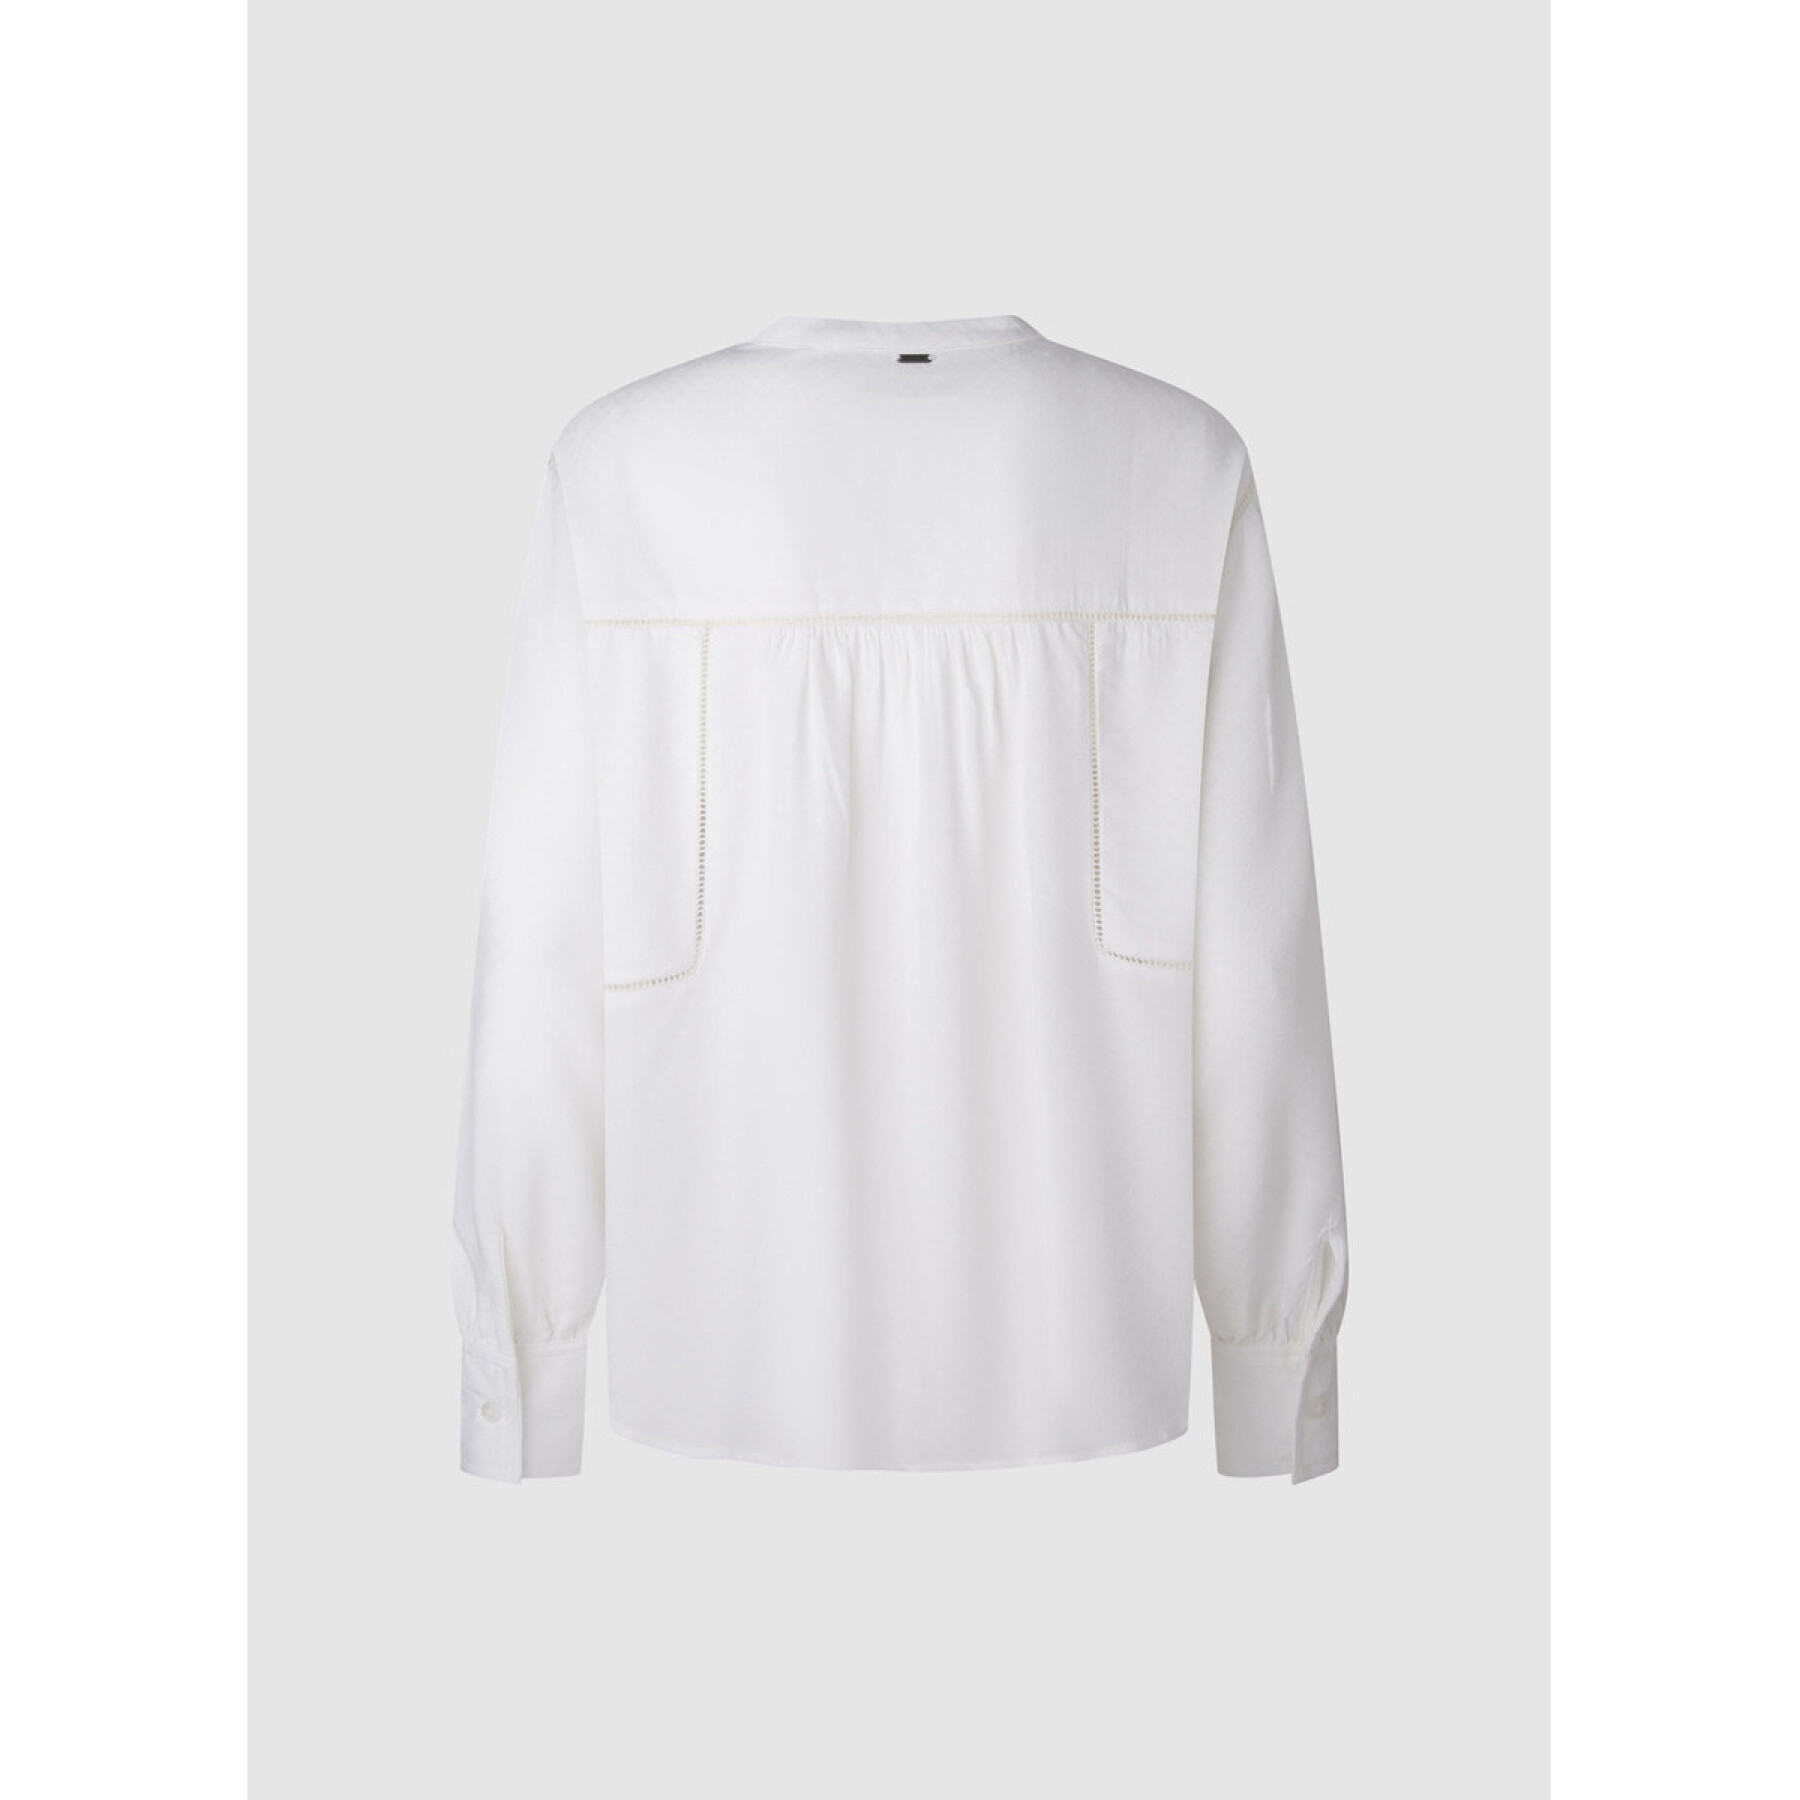 Blusa de mujer Pepe Jeans Clementina